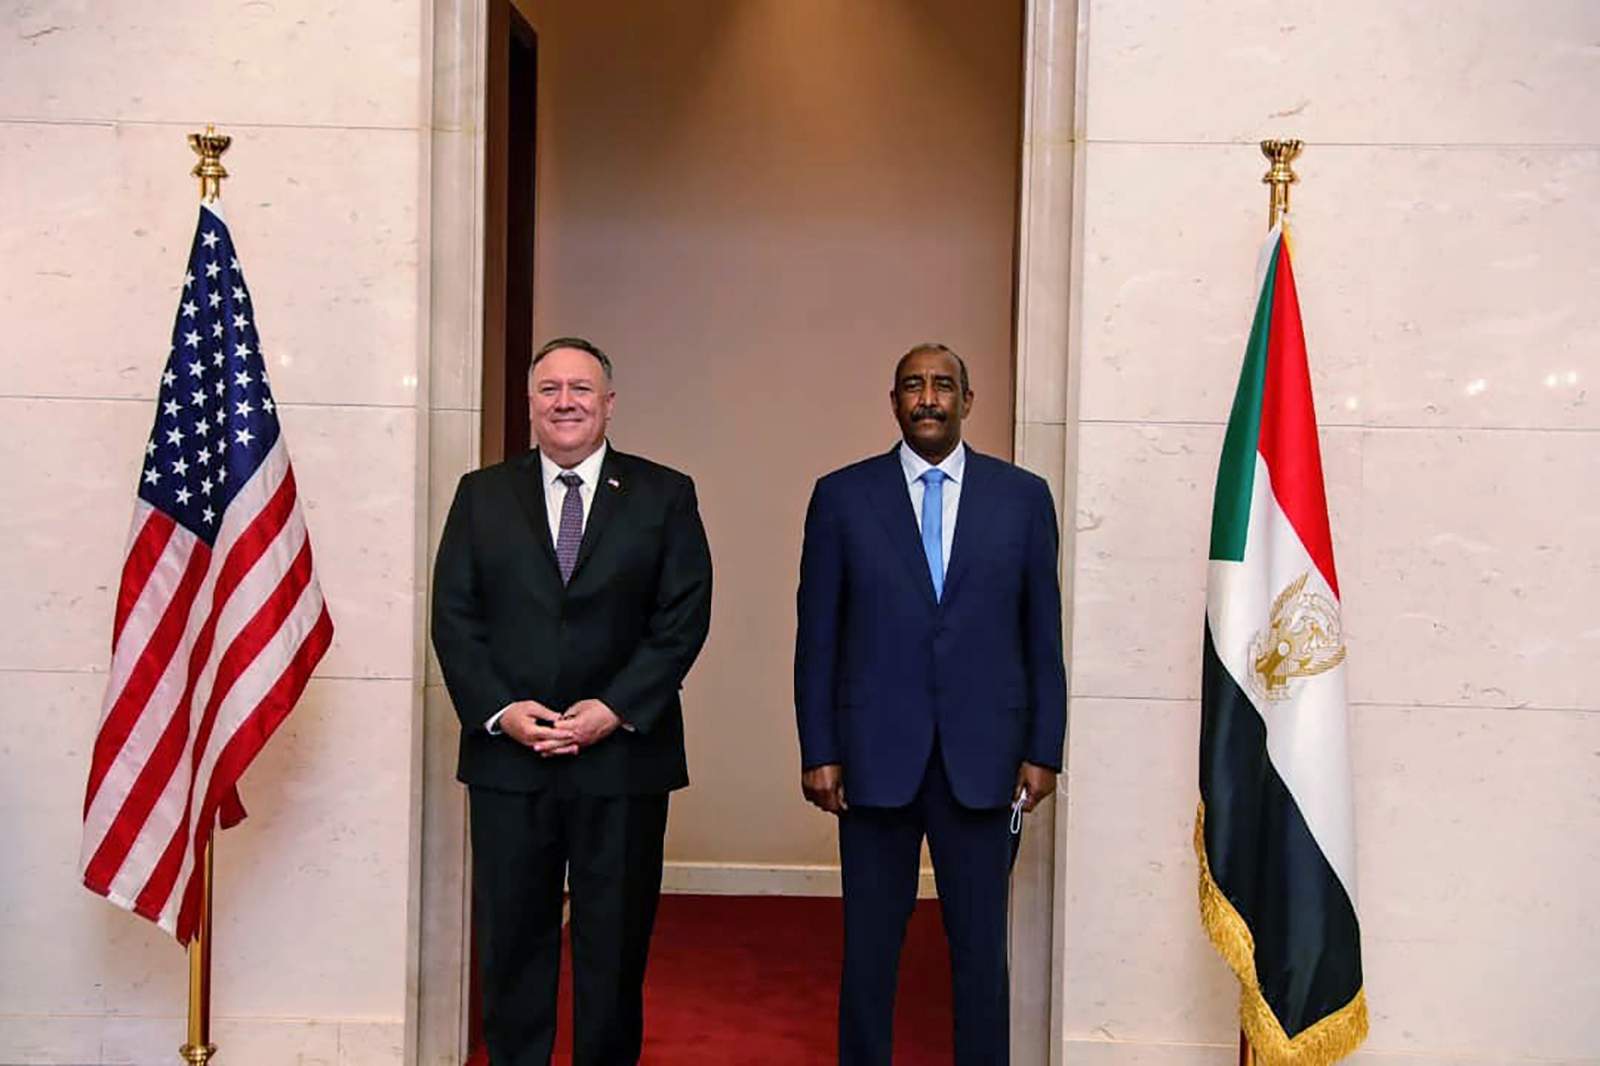 Trump says Sudan to be removed from terrorism list